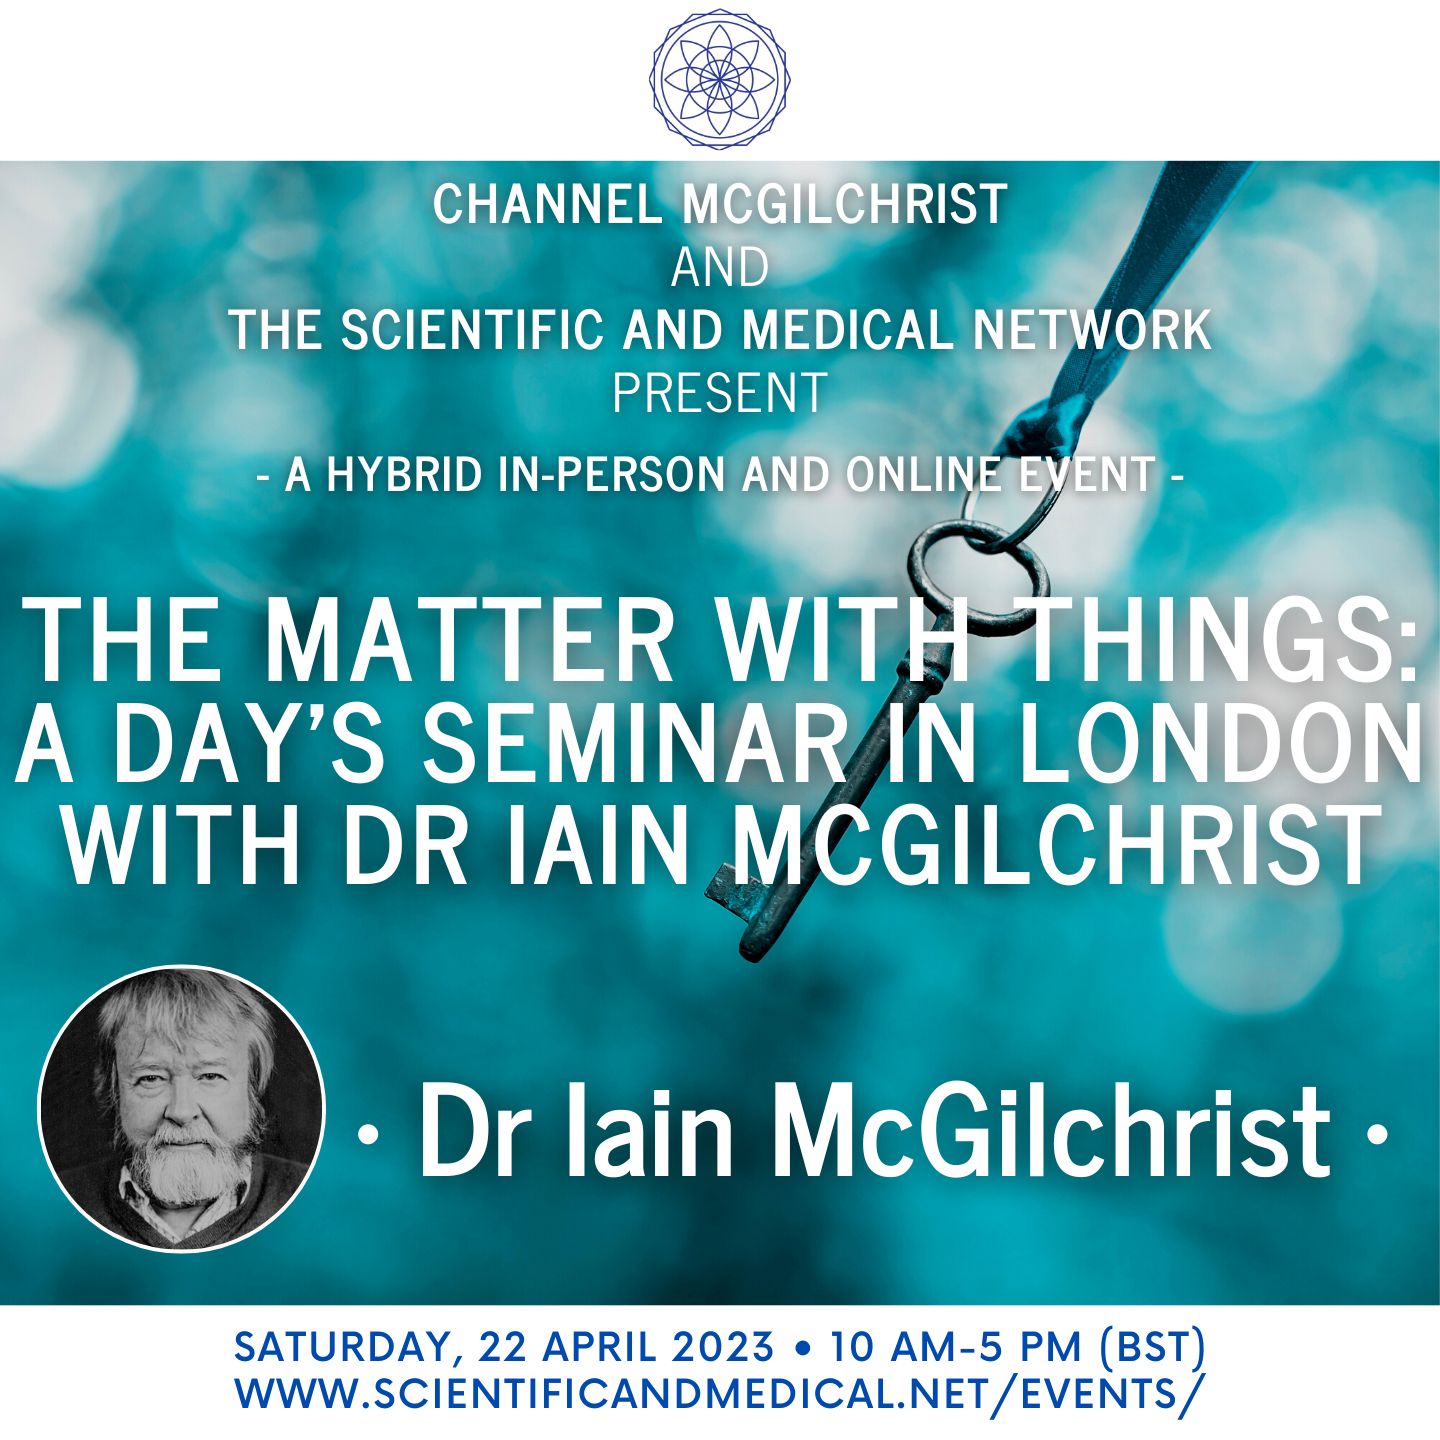 The Matter with Things A days seminar in london with Dr Iain McGilchrist